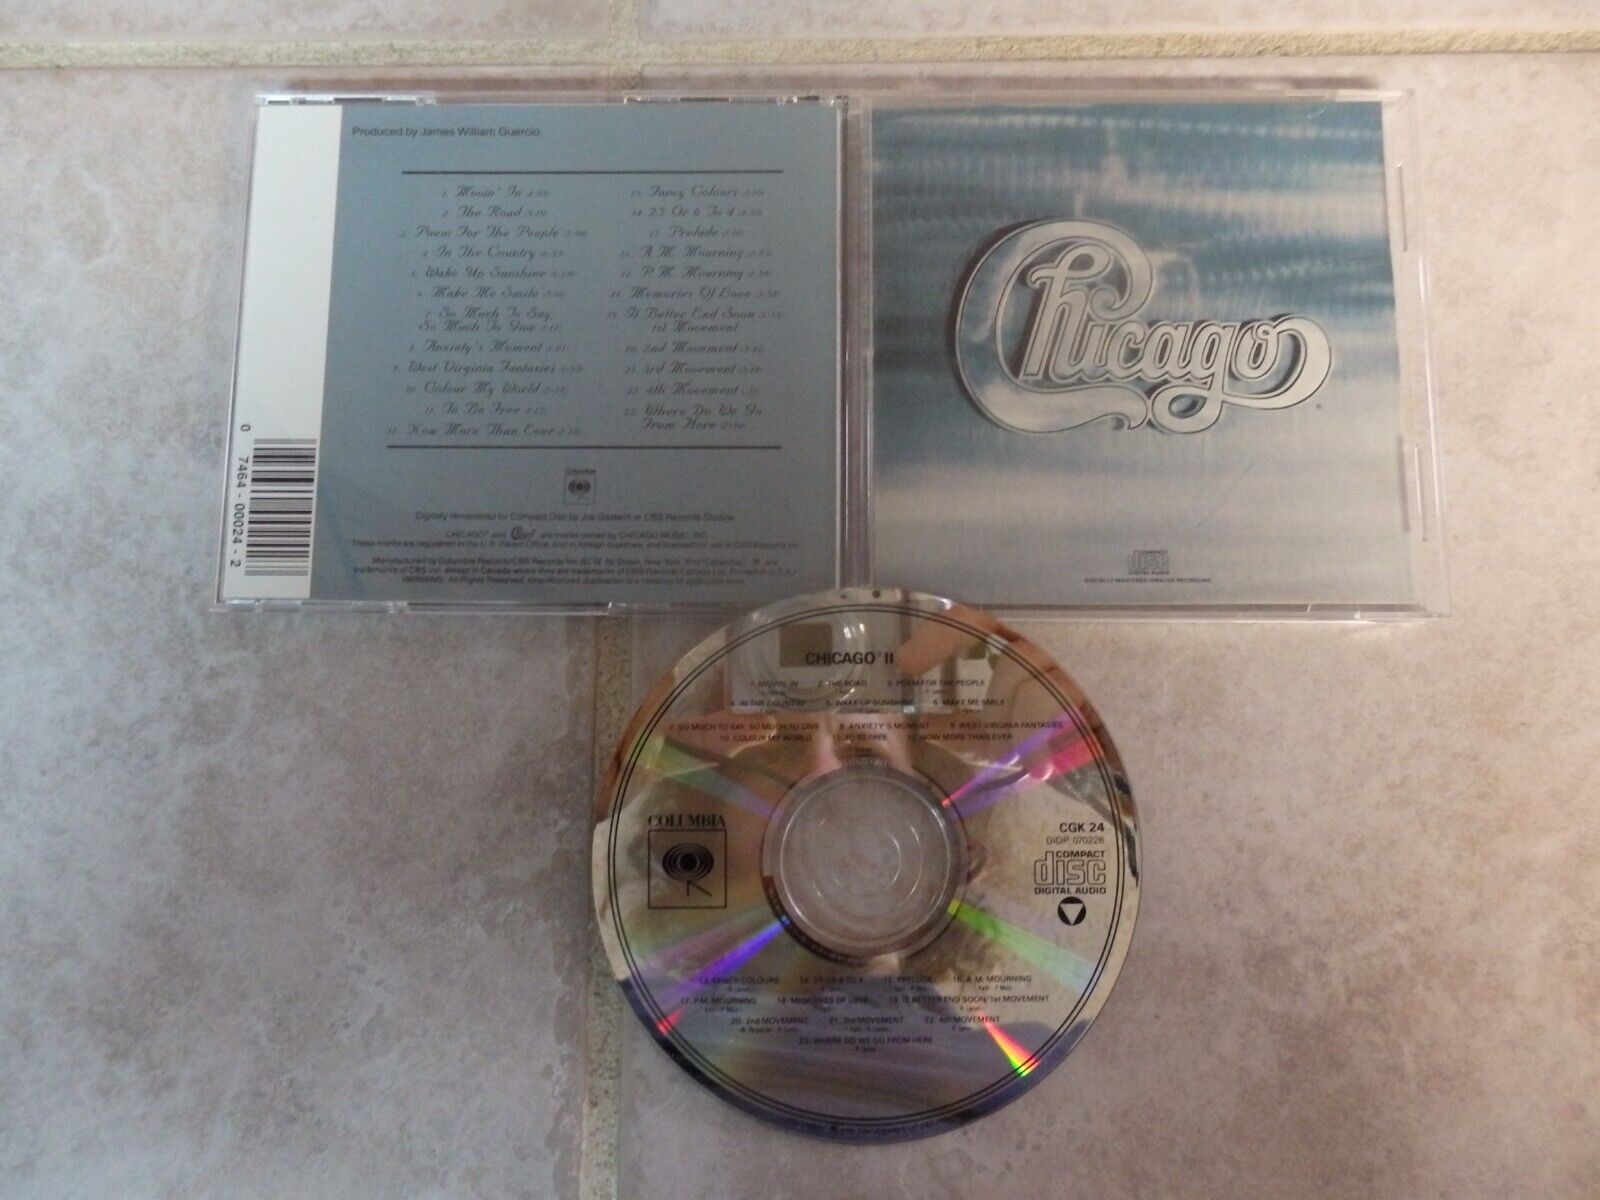 Chicago II CD Classic Rock Rare Out of Print